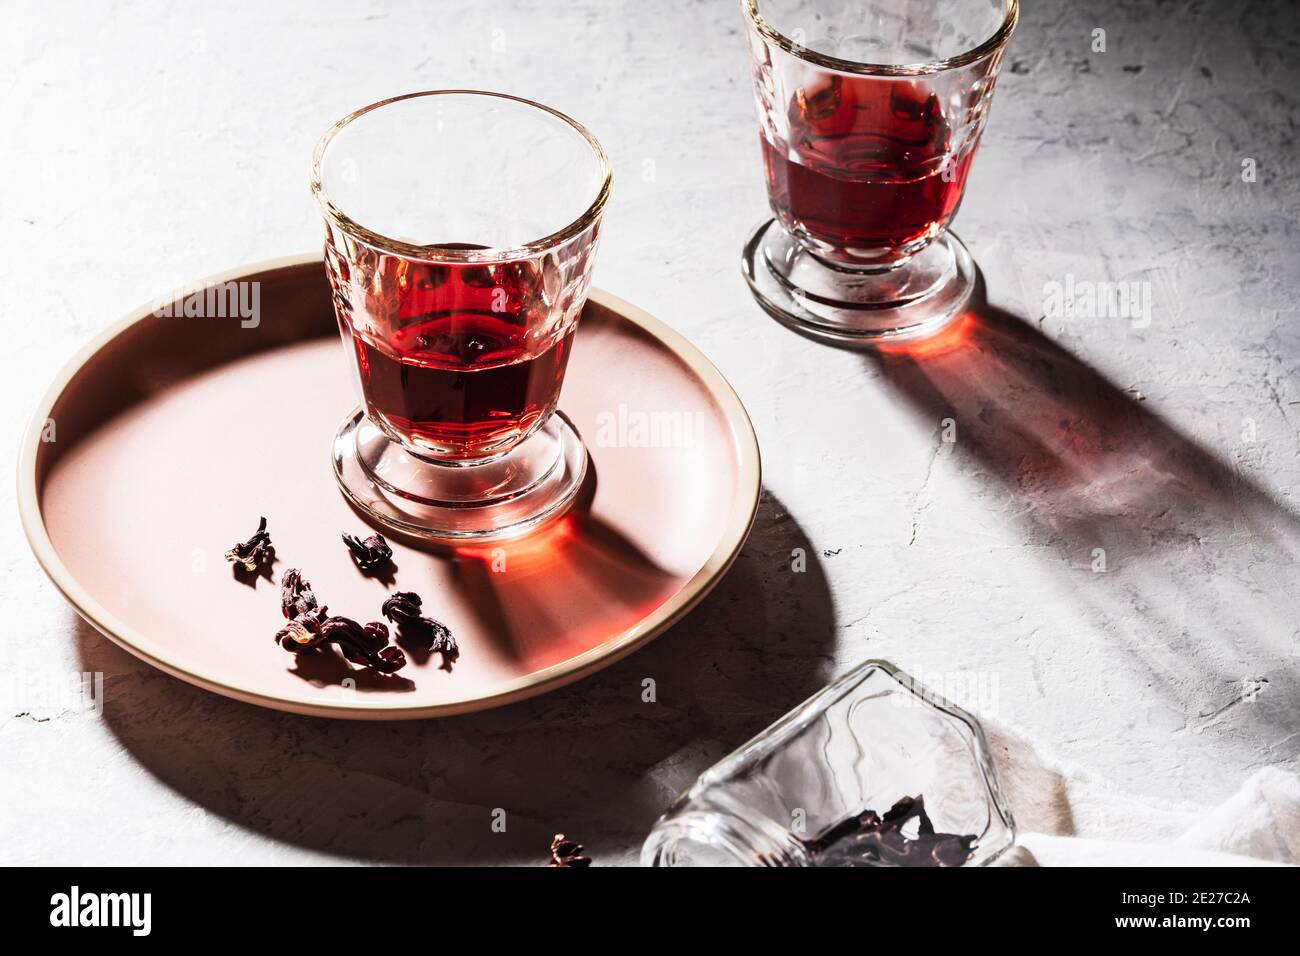 Refreshing fruit herbal tea in glasses, ripe pomegranate on plate, hibiscus tea and dry rose petals, hard light with harsh shadows Stock Photo